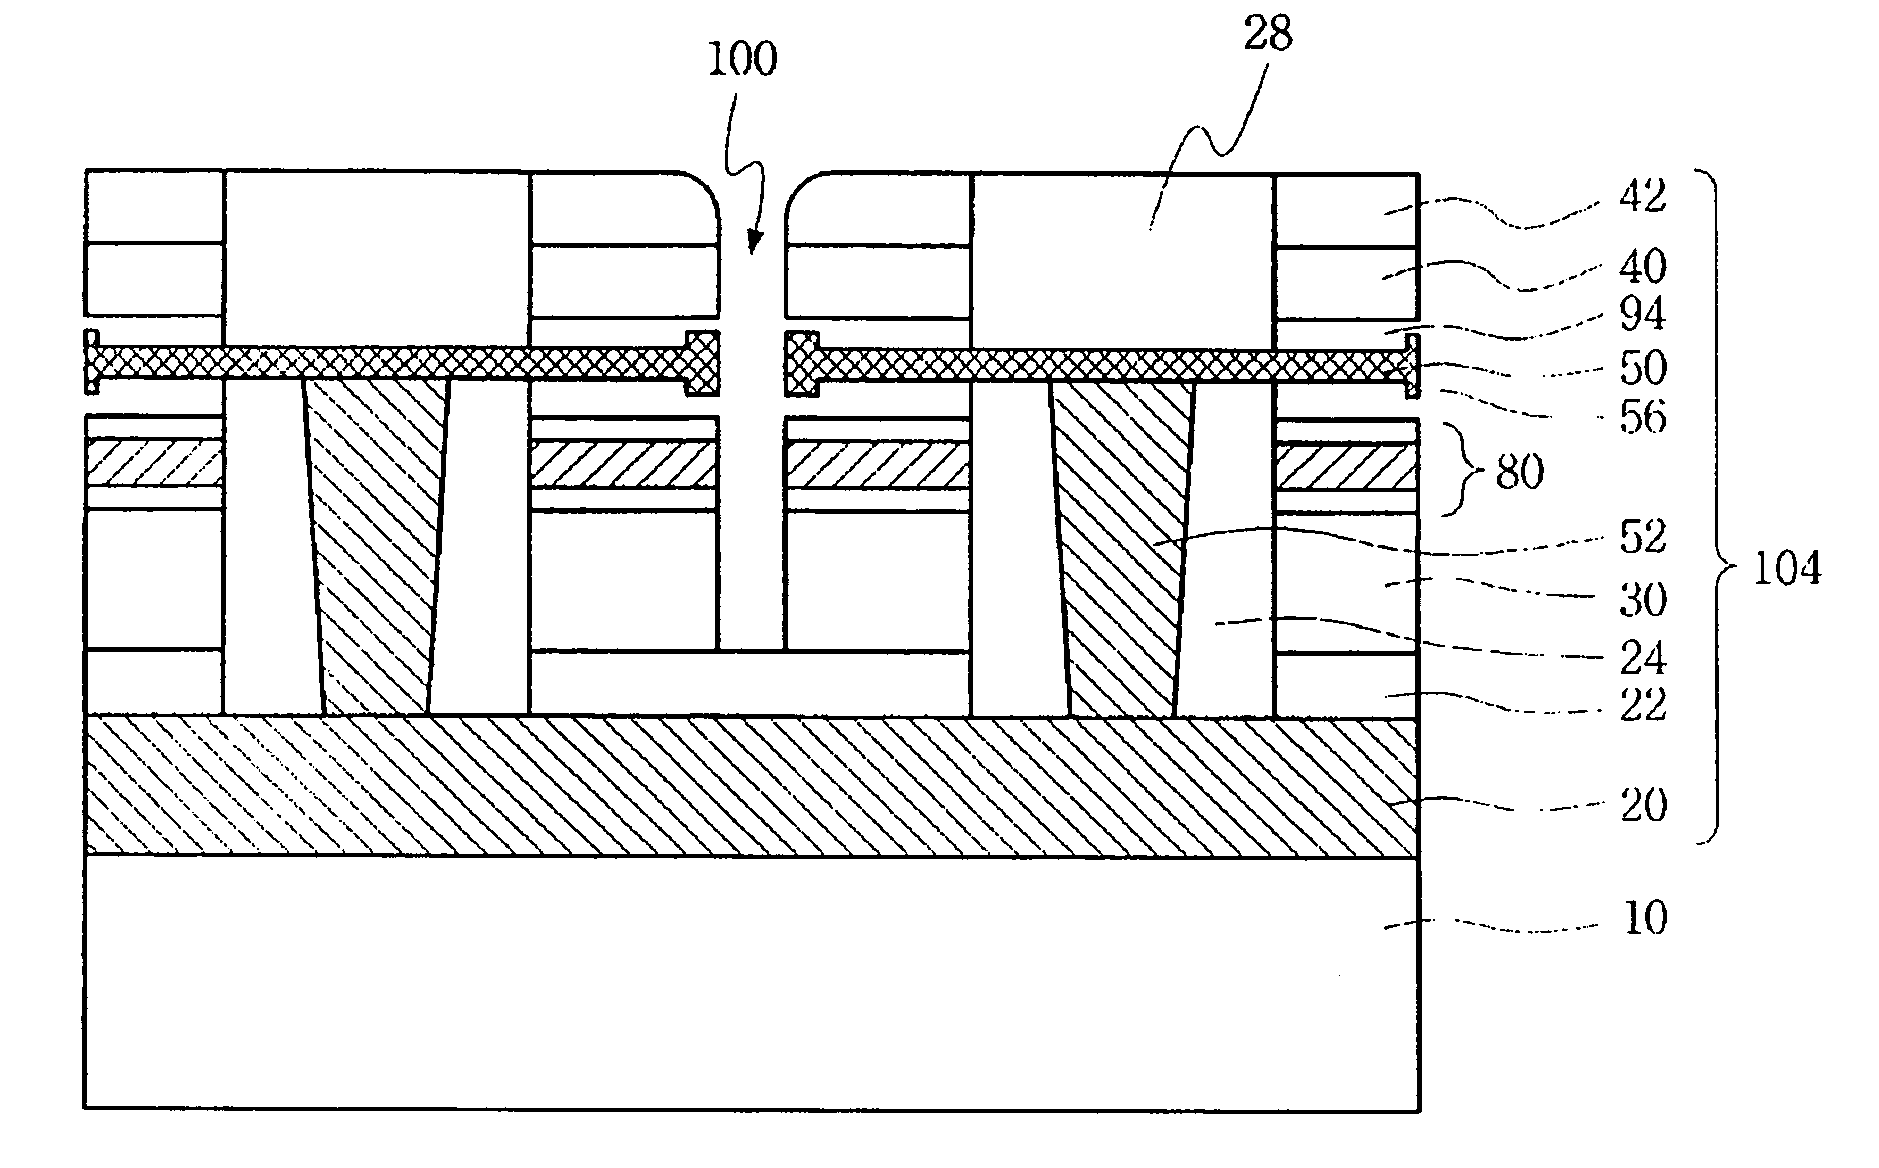 Multibit electro-mechanical memory device and method of manufacturing the same